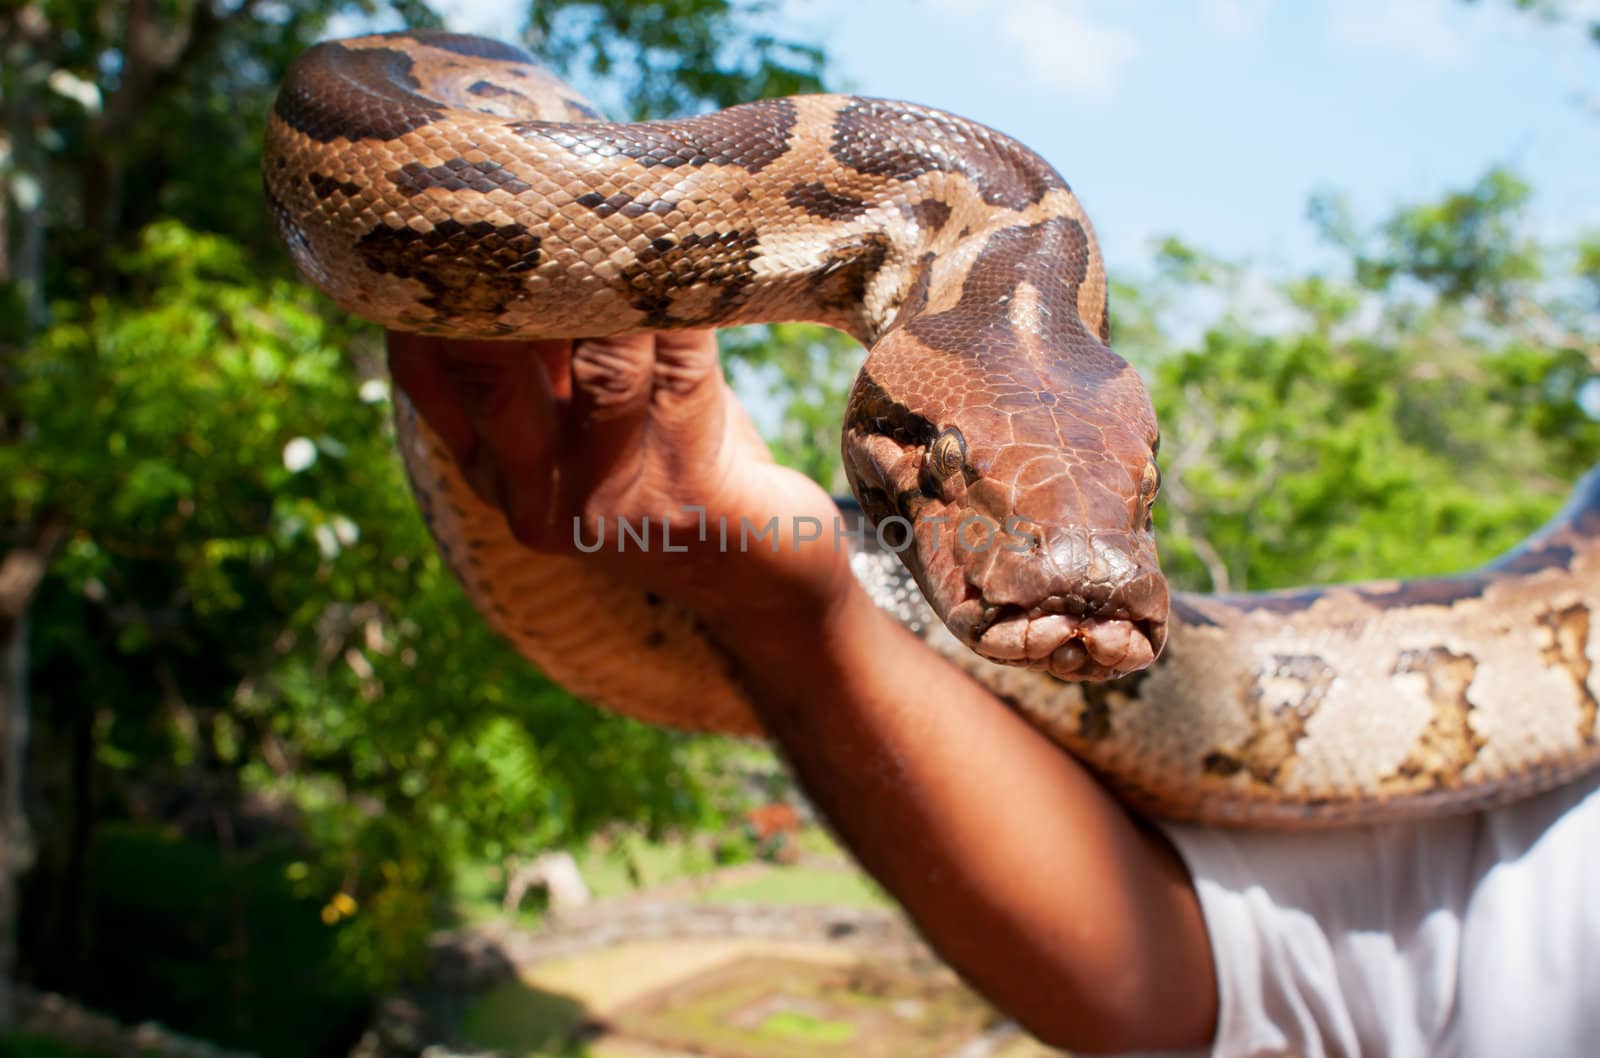 Hand-reared python in male hand. Focus on the snake.